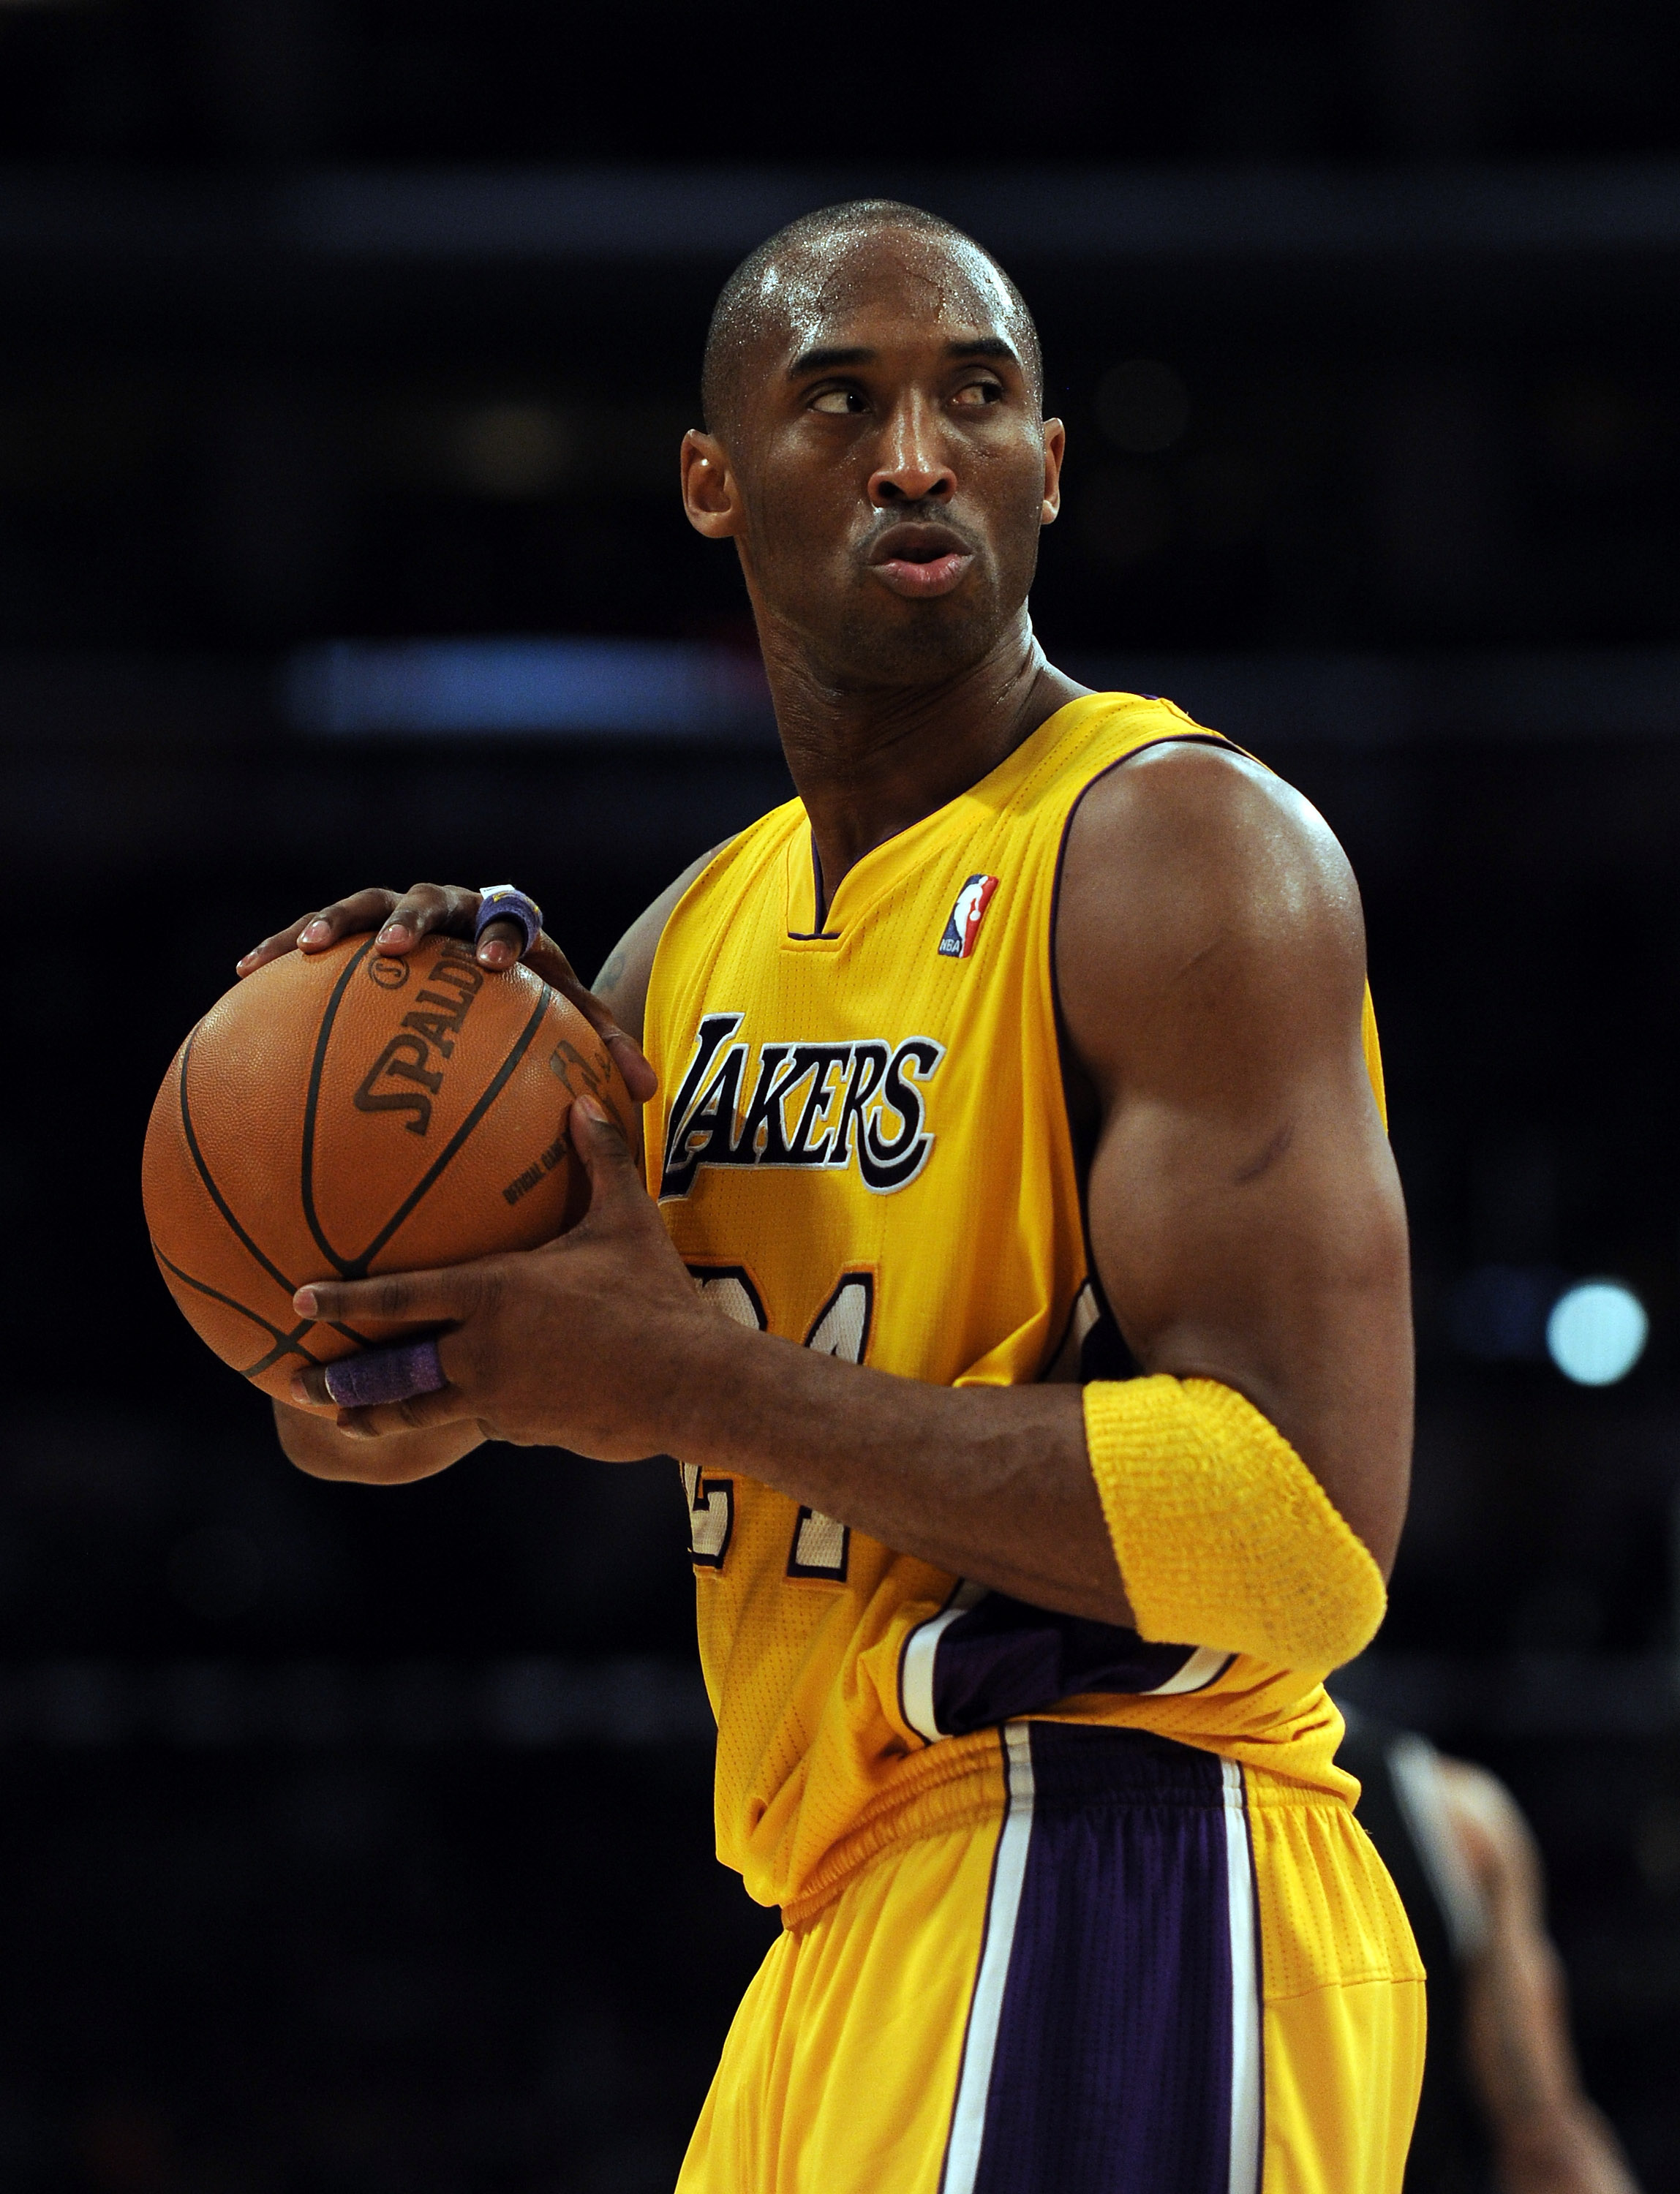 LOS ANGELES, CA - FEBRUARY 03:  Kobe Bryant #24 of the Los Angeles Lakers reacts to his defense during a stop in play against the San Antonio Spurs during the first half at Staples Center on February 3, 2011 in Los Angeles, California.  NOTE TO USER: User